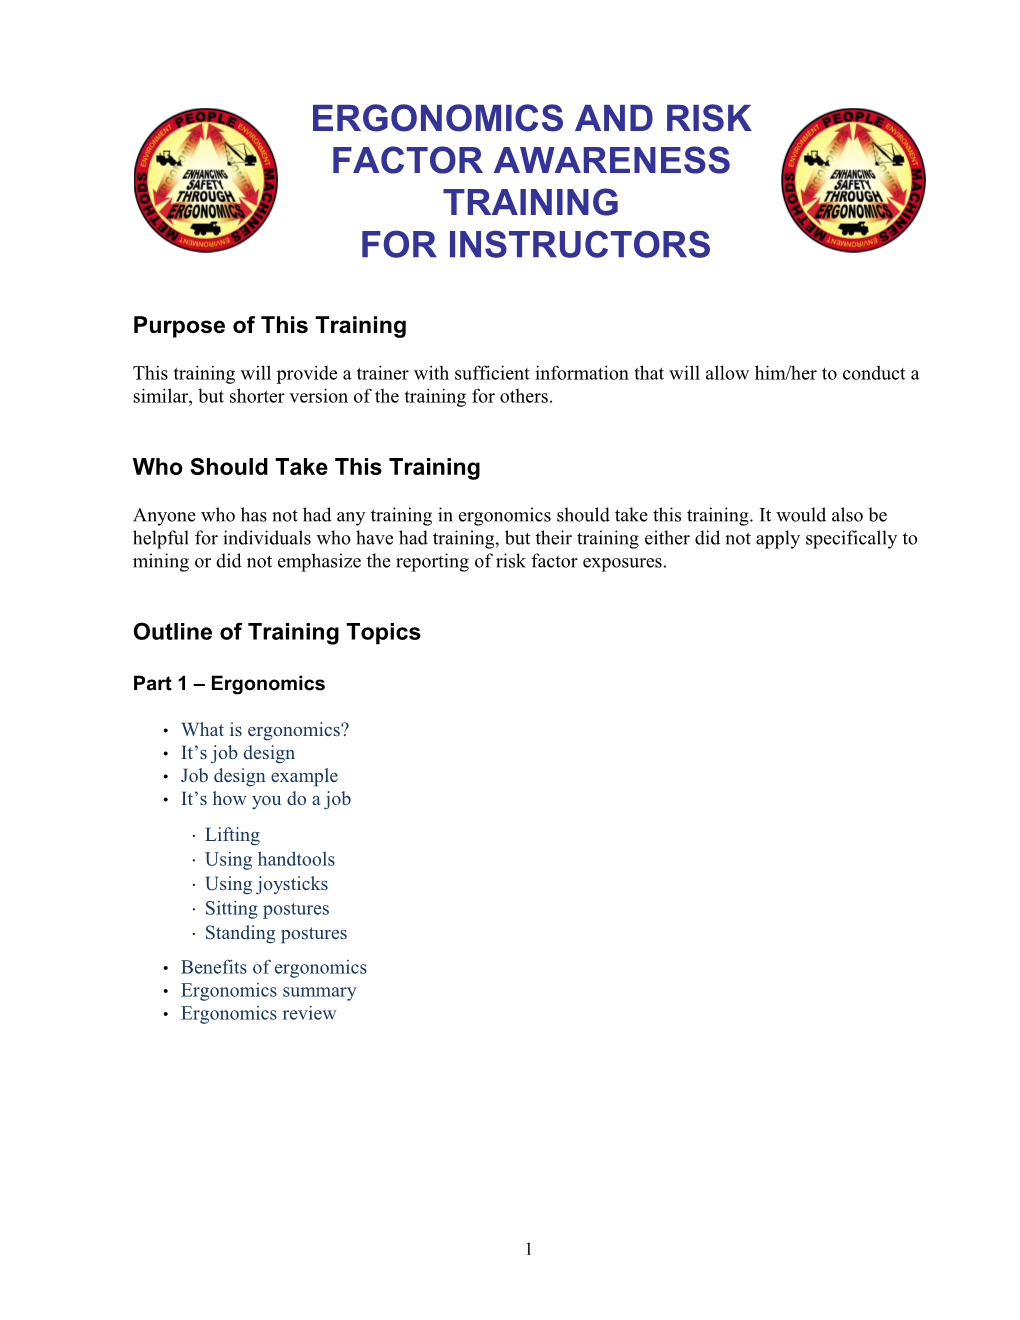 Training for Instructors